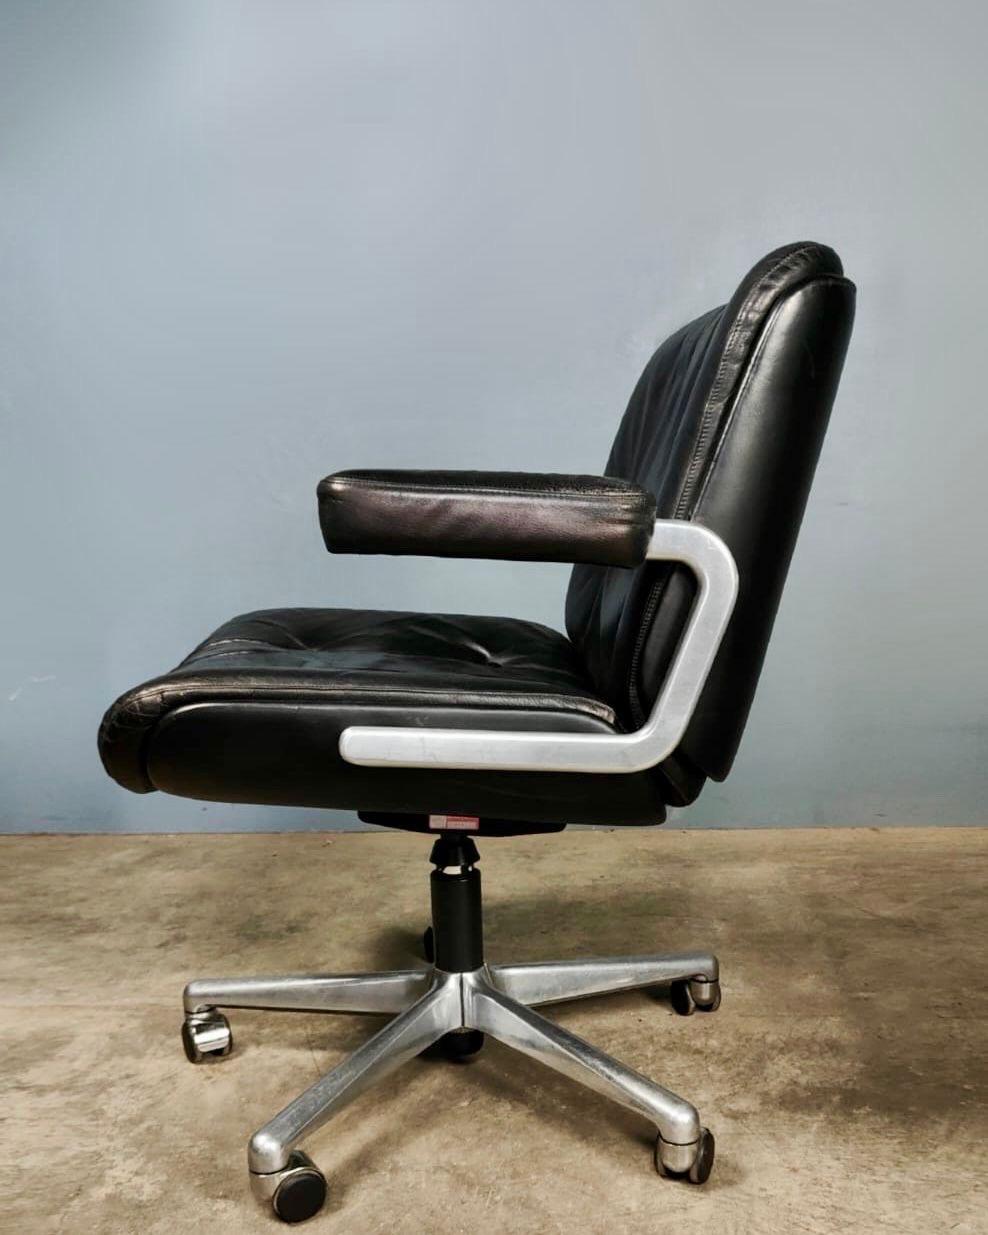 Giroflex Swivel Black Leather Desk Office Chair Karl Dittert Martin Stoll Retro In Excellent Condition For Sale In Cambridge, GB